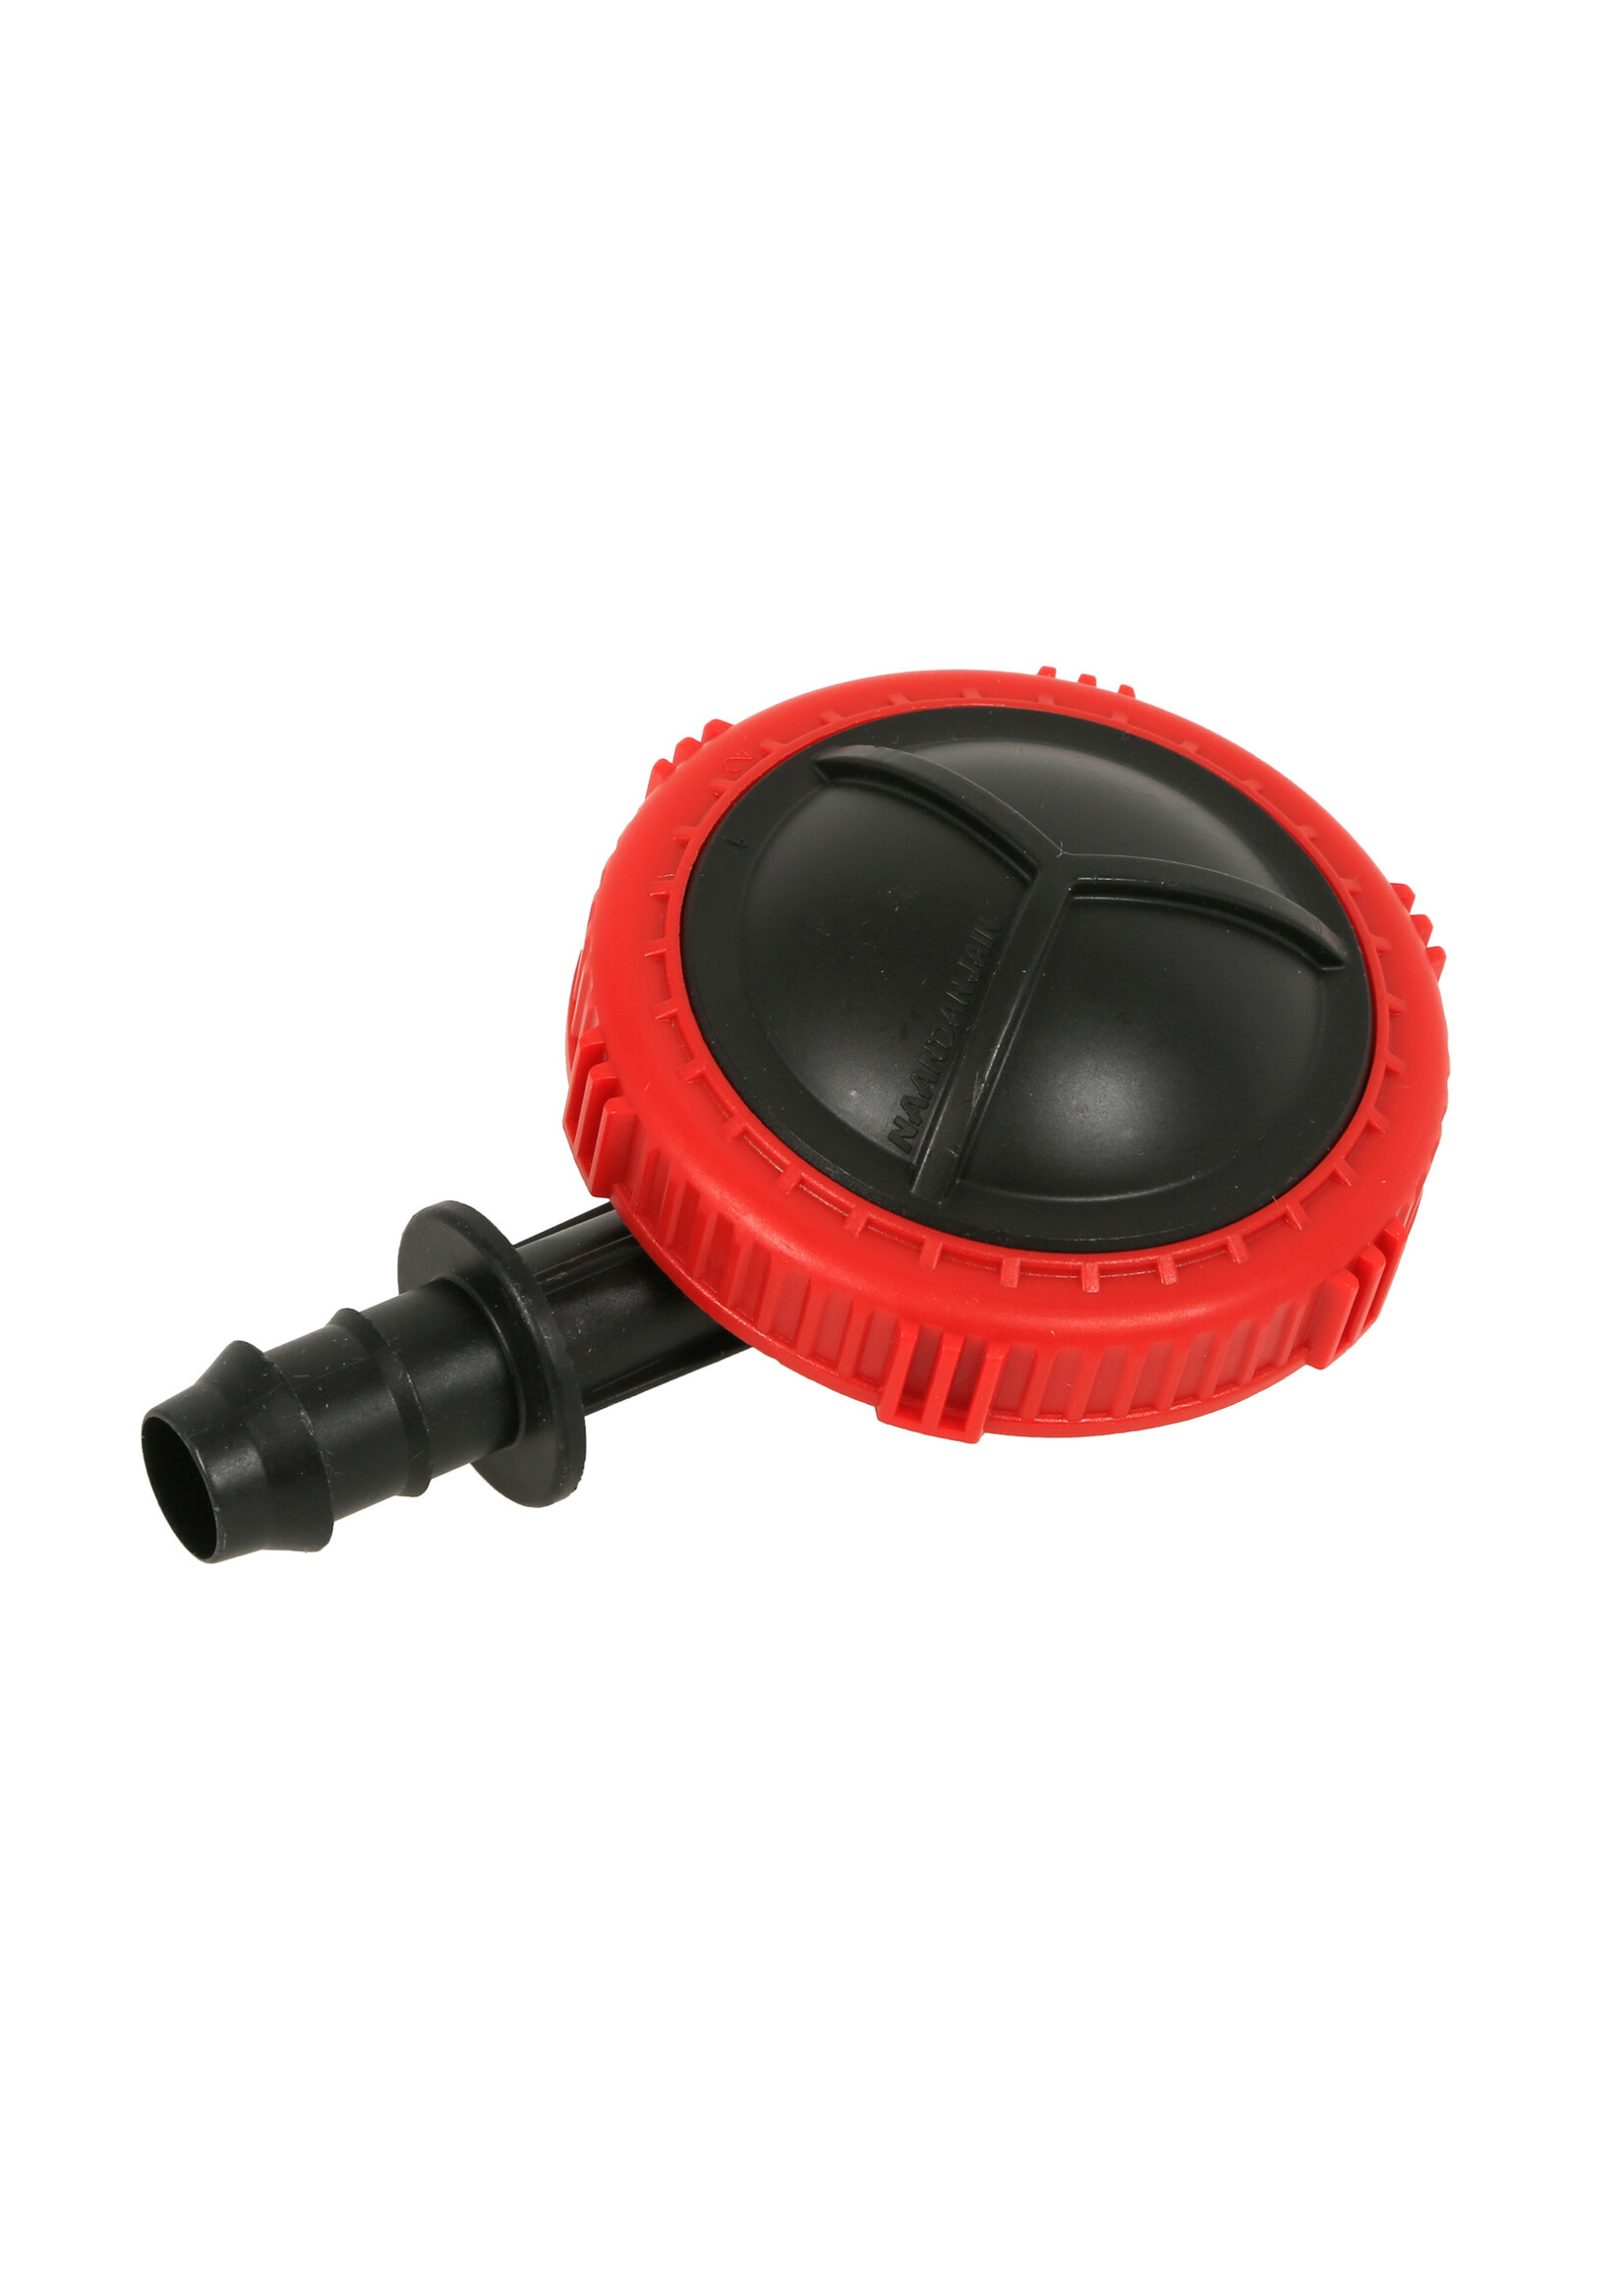 Hydro Flow Hydro Flow Lateral Flush Valve Barbed 1/2 inch (17mm)